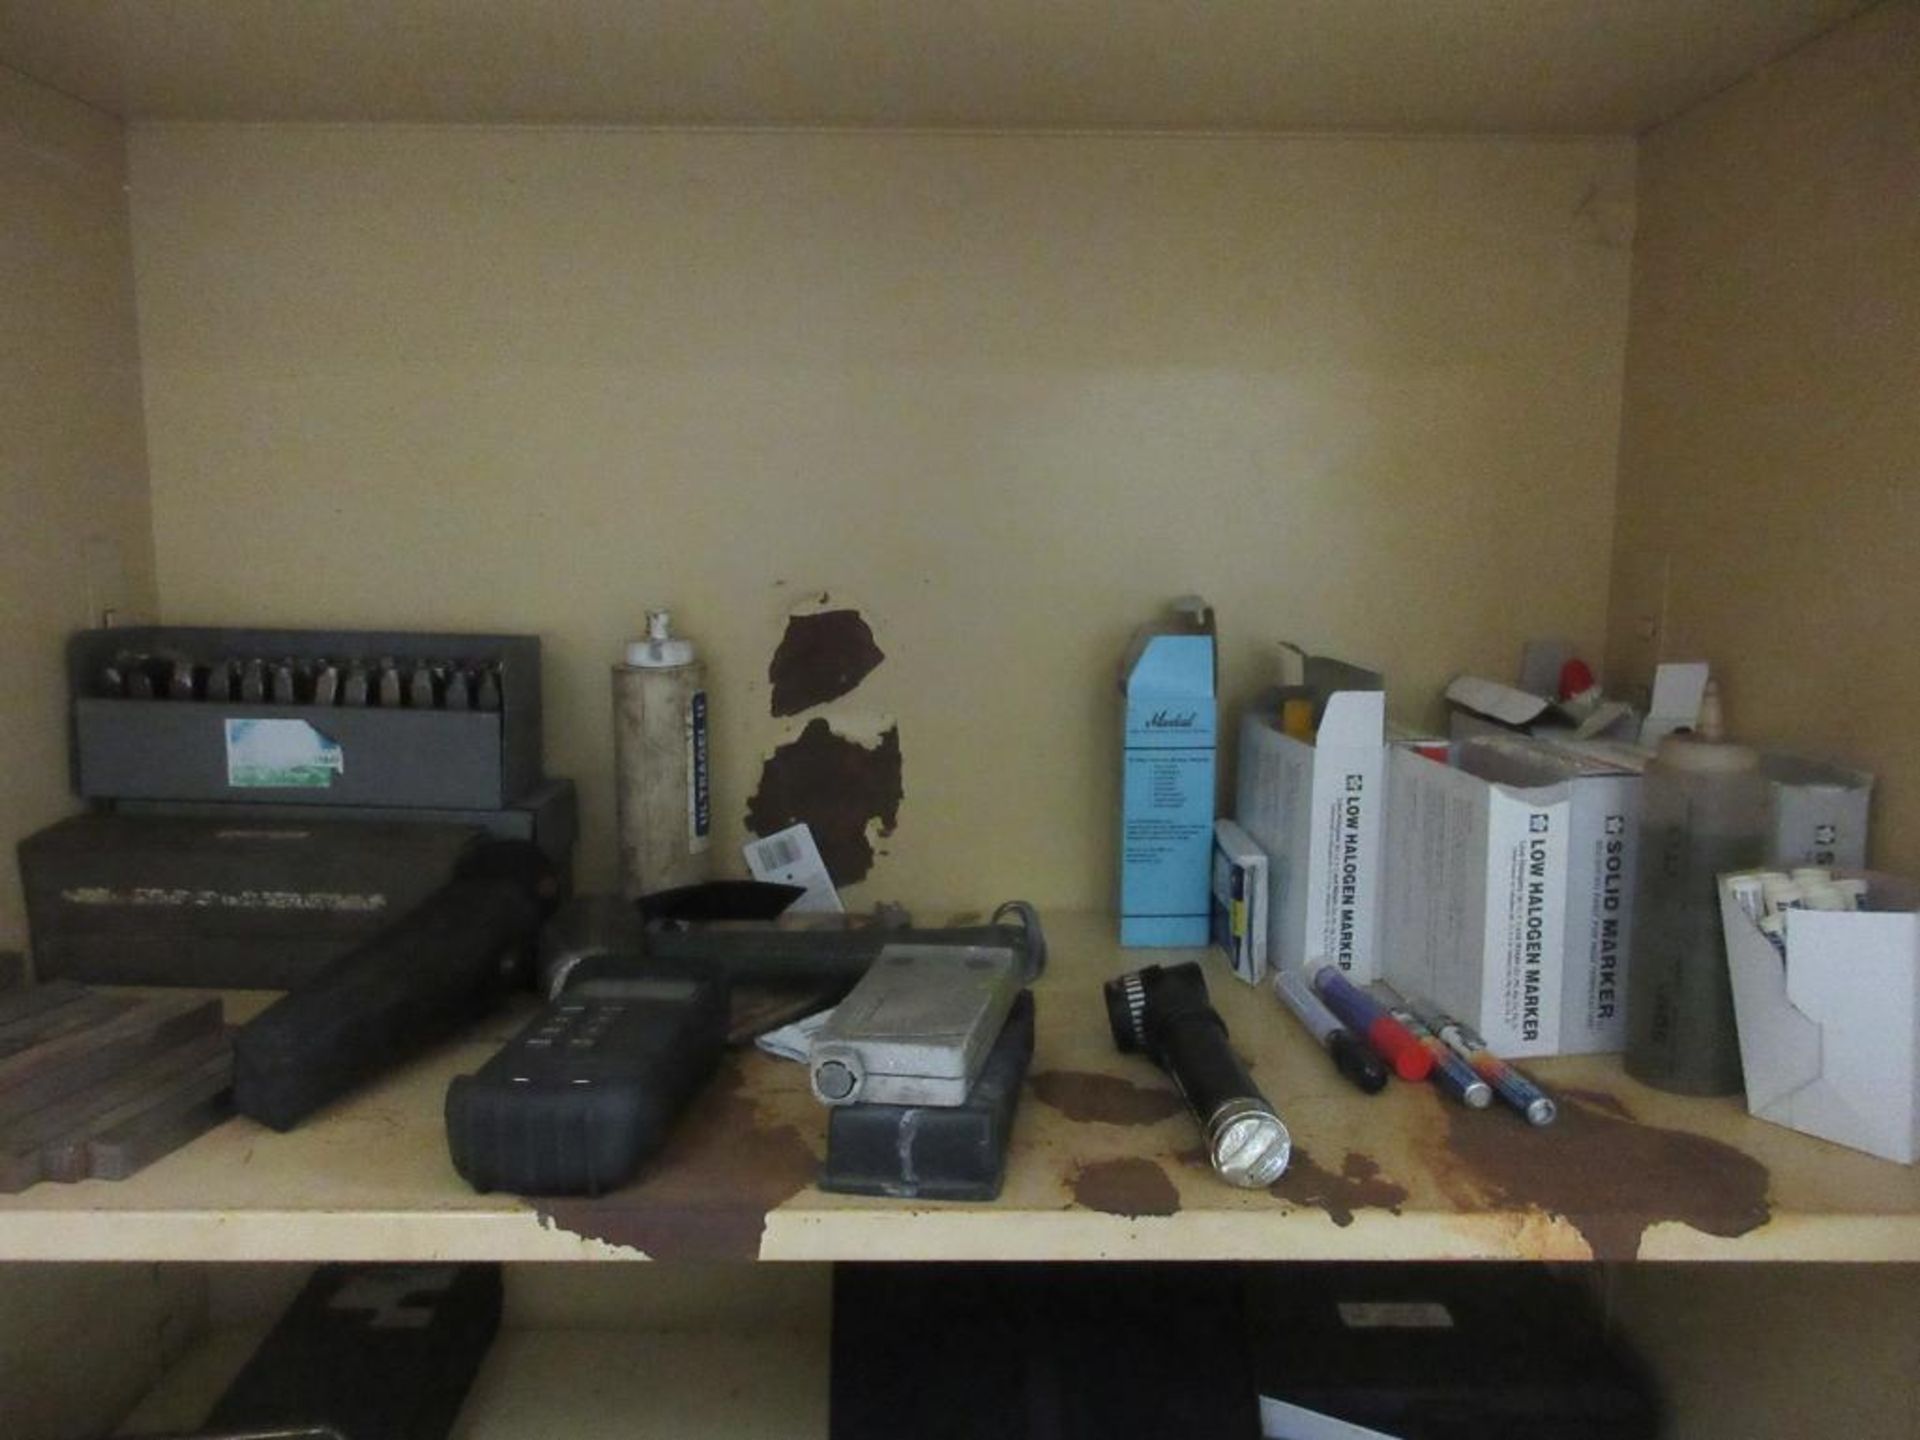 CONTENTS OF 3 CABINETS IN WORK AREA, TEST AND MEASUREMENT EQUIPMENT, METERS, TOOLS, ETC (OFFICES) - Image 11 of 18